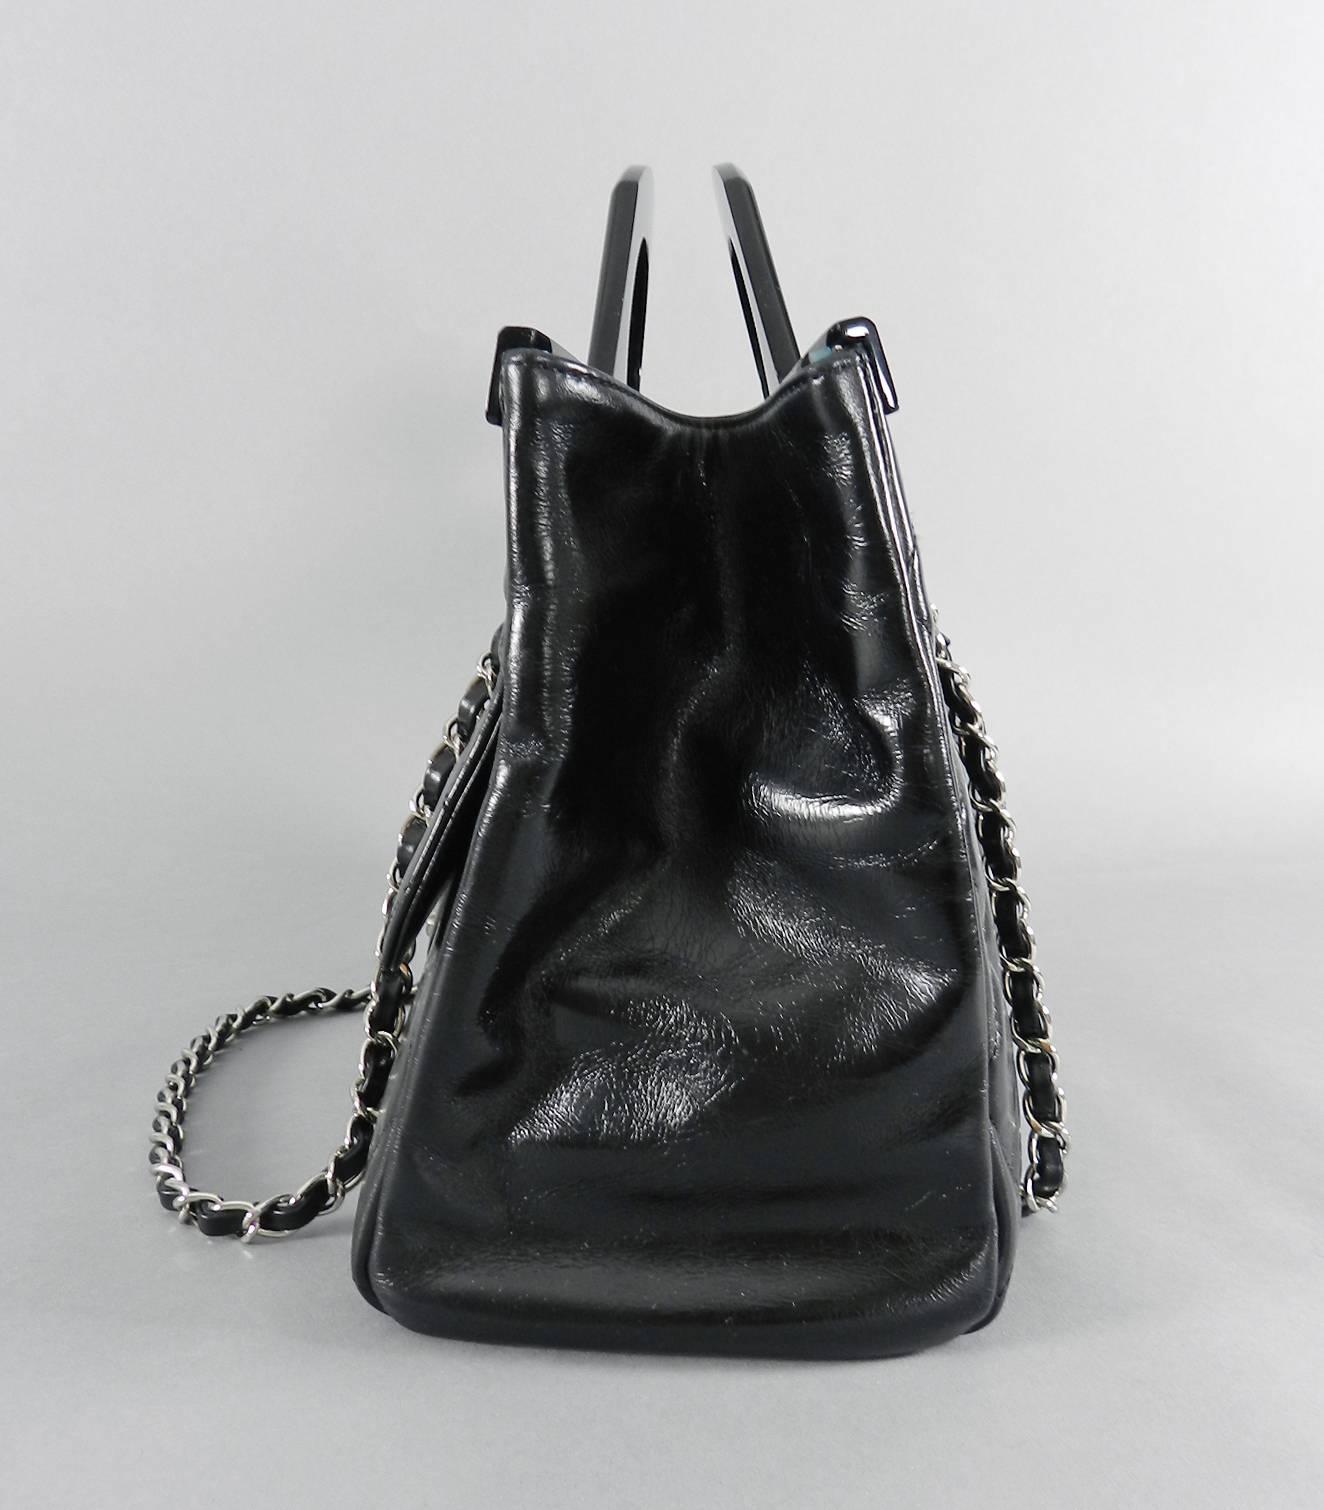 Chanel 15B Small Glazed Black CC delivery tote.  Double resin handle design, open tote style that closes with a magnetic clasp tab, and one small zippered interior compartment.  Body of bag measures about 12.5 x 8 x 5.25